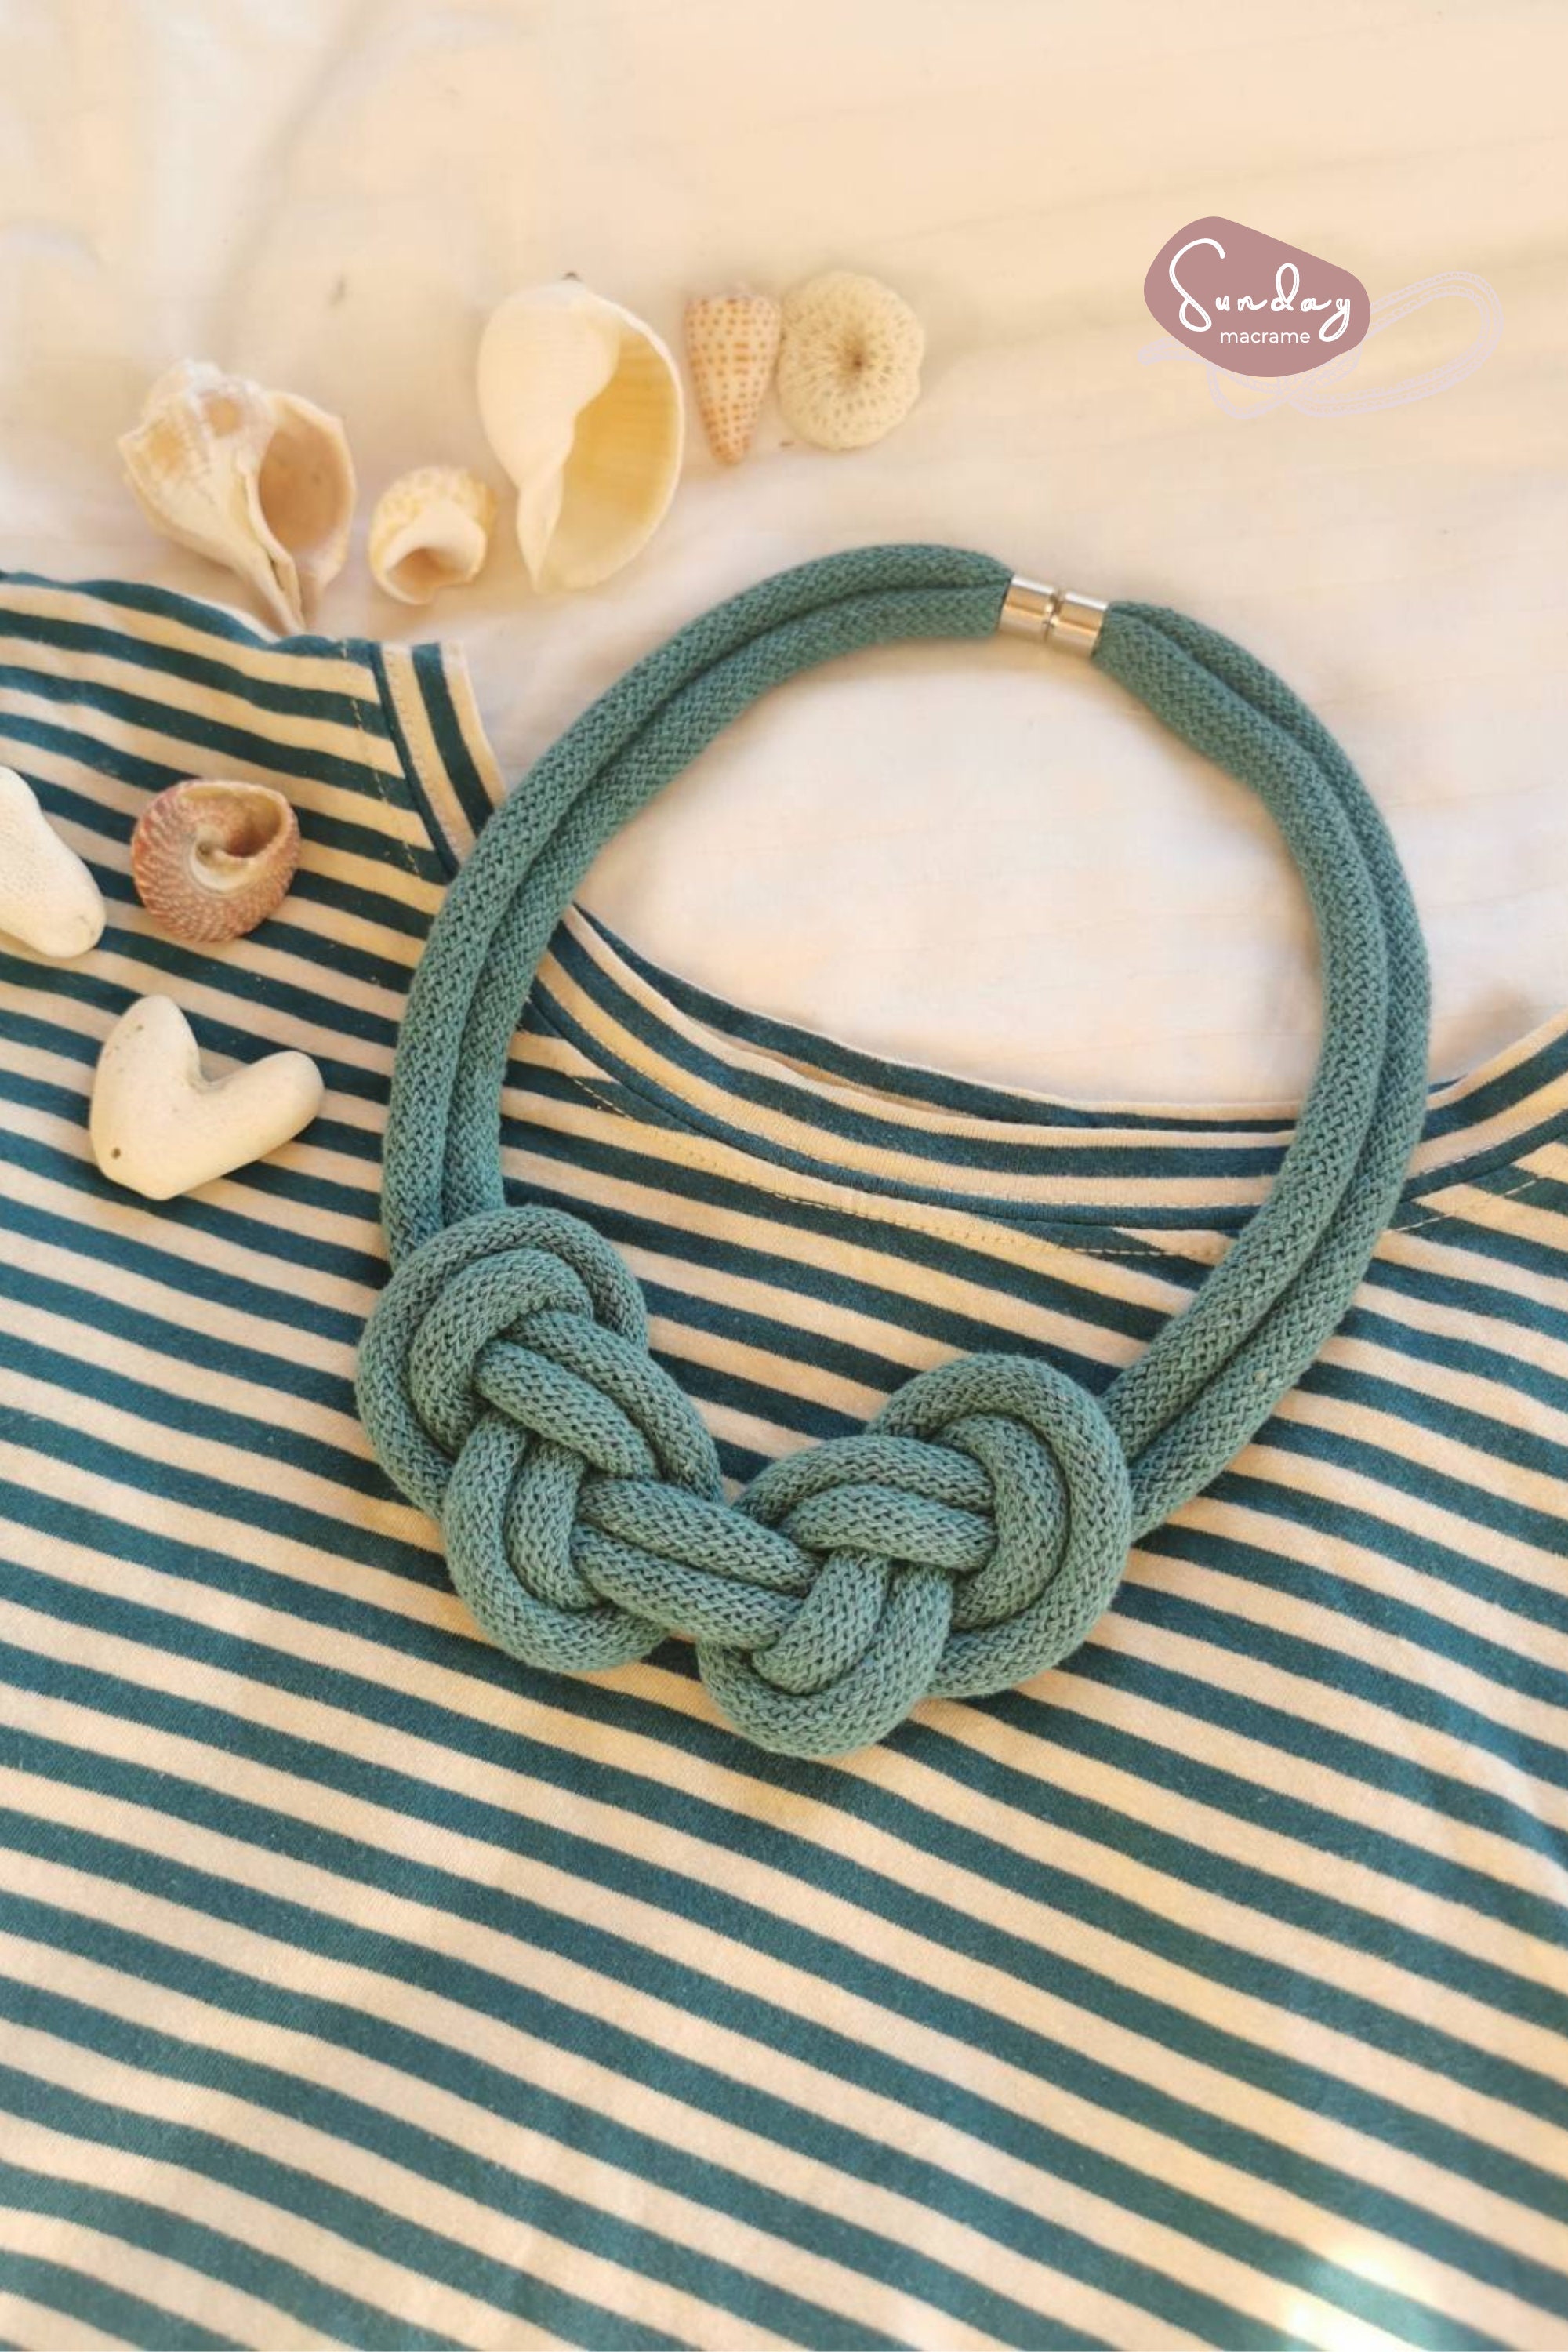 Women cotton rope necklace - rope statement necklace - textile necklace -  cotton rope necklace for women - simple jewelry -women accessories